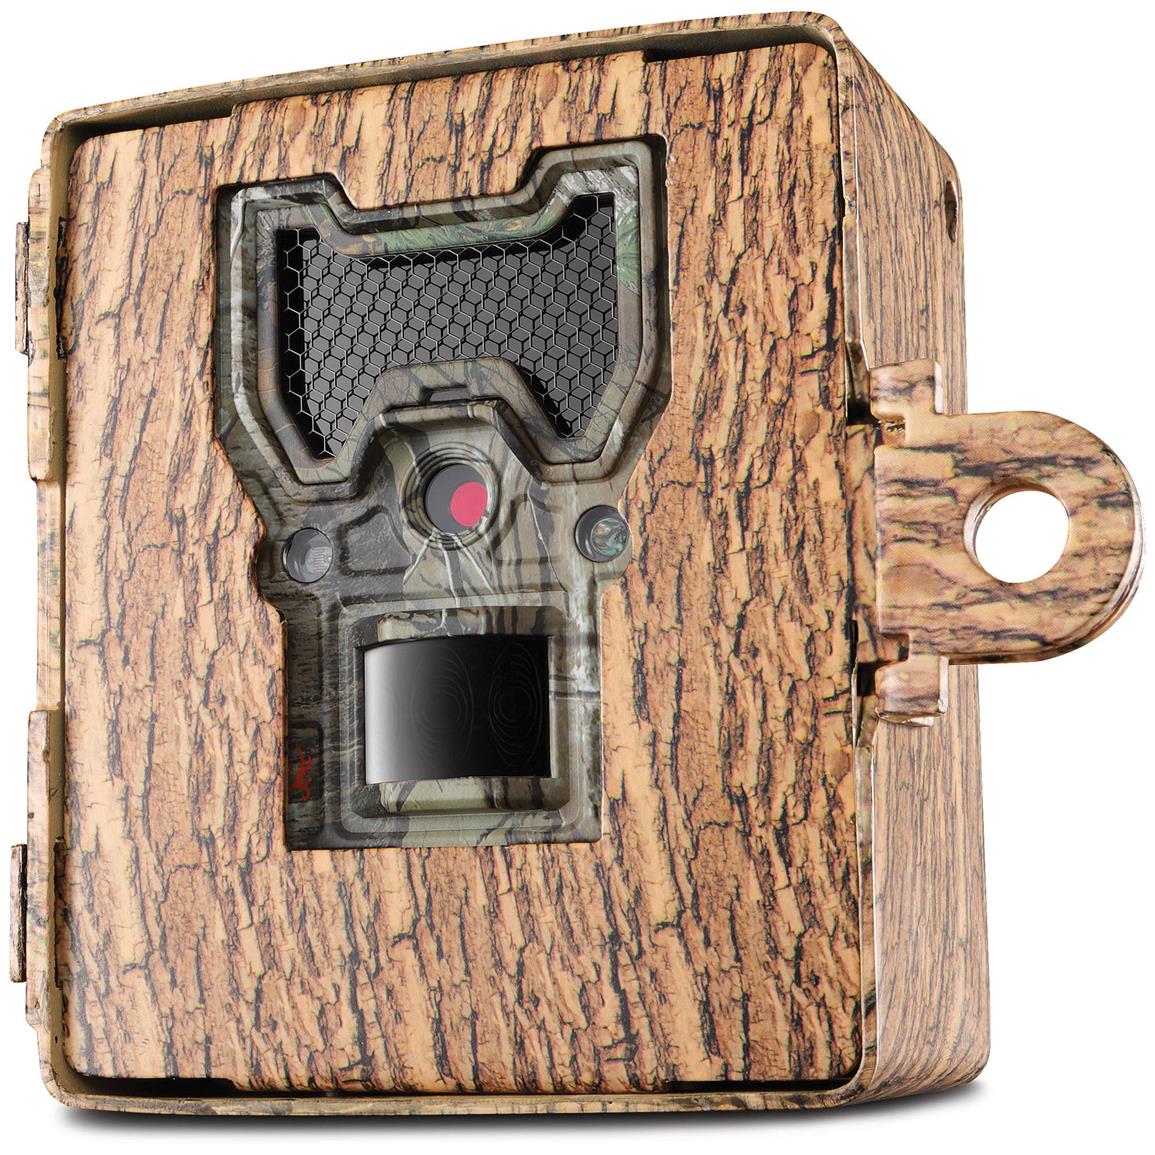 Bushnell Game Camera Troubleshooting